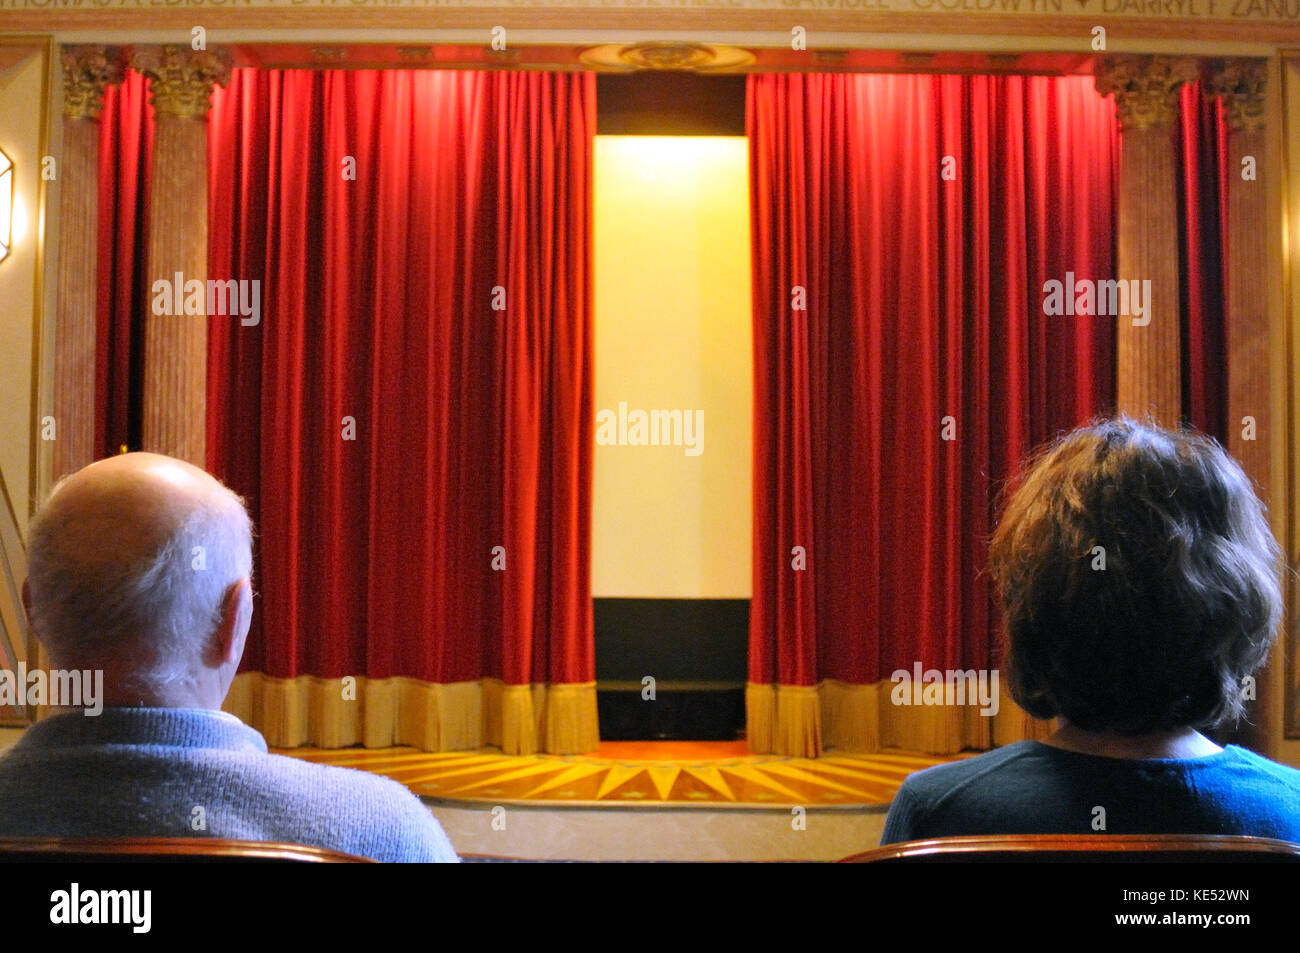 Velvet red curtains slightly open shows man and woman watching in private cinema built in 1920s, early 1930s style. Brightly lit. Stock Photo